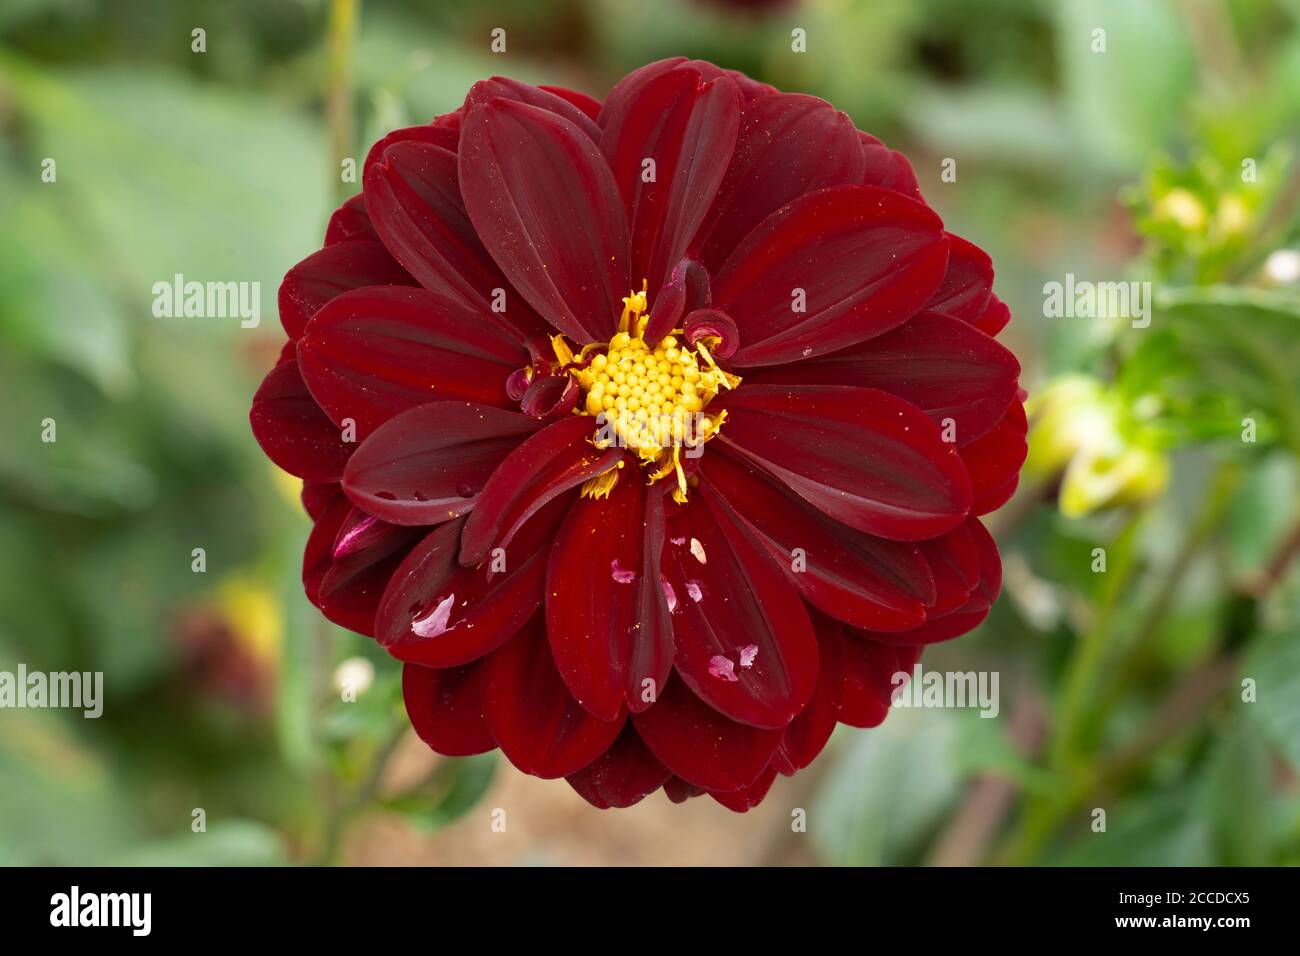 Intense dark semi double red peony Dahlia flower with a compact yellow centre and raindrops on the petals, from the Asteraceae family, August, Austria Stock Photo